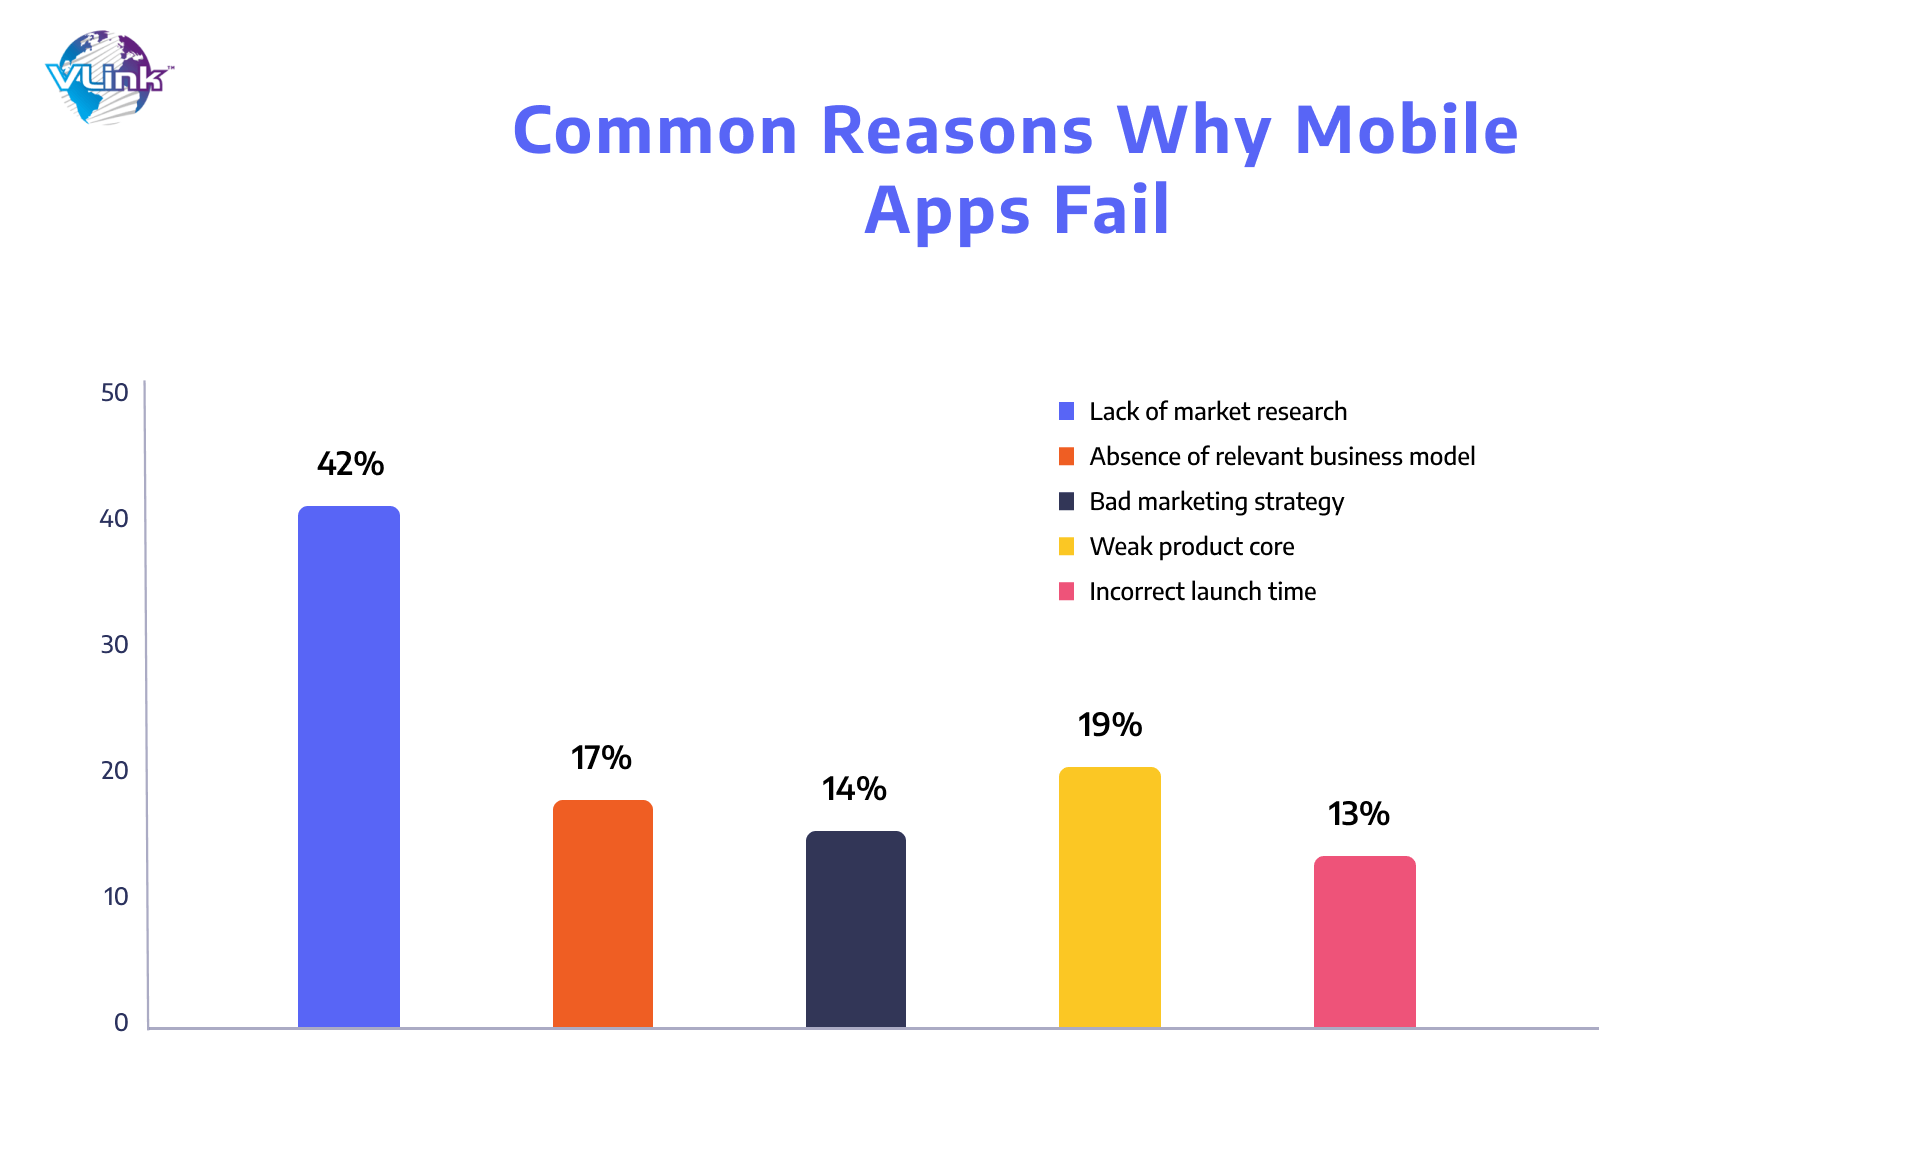 Common reasons why mobile apps fail